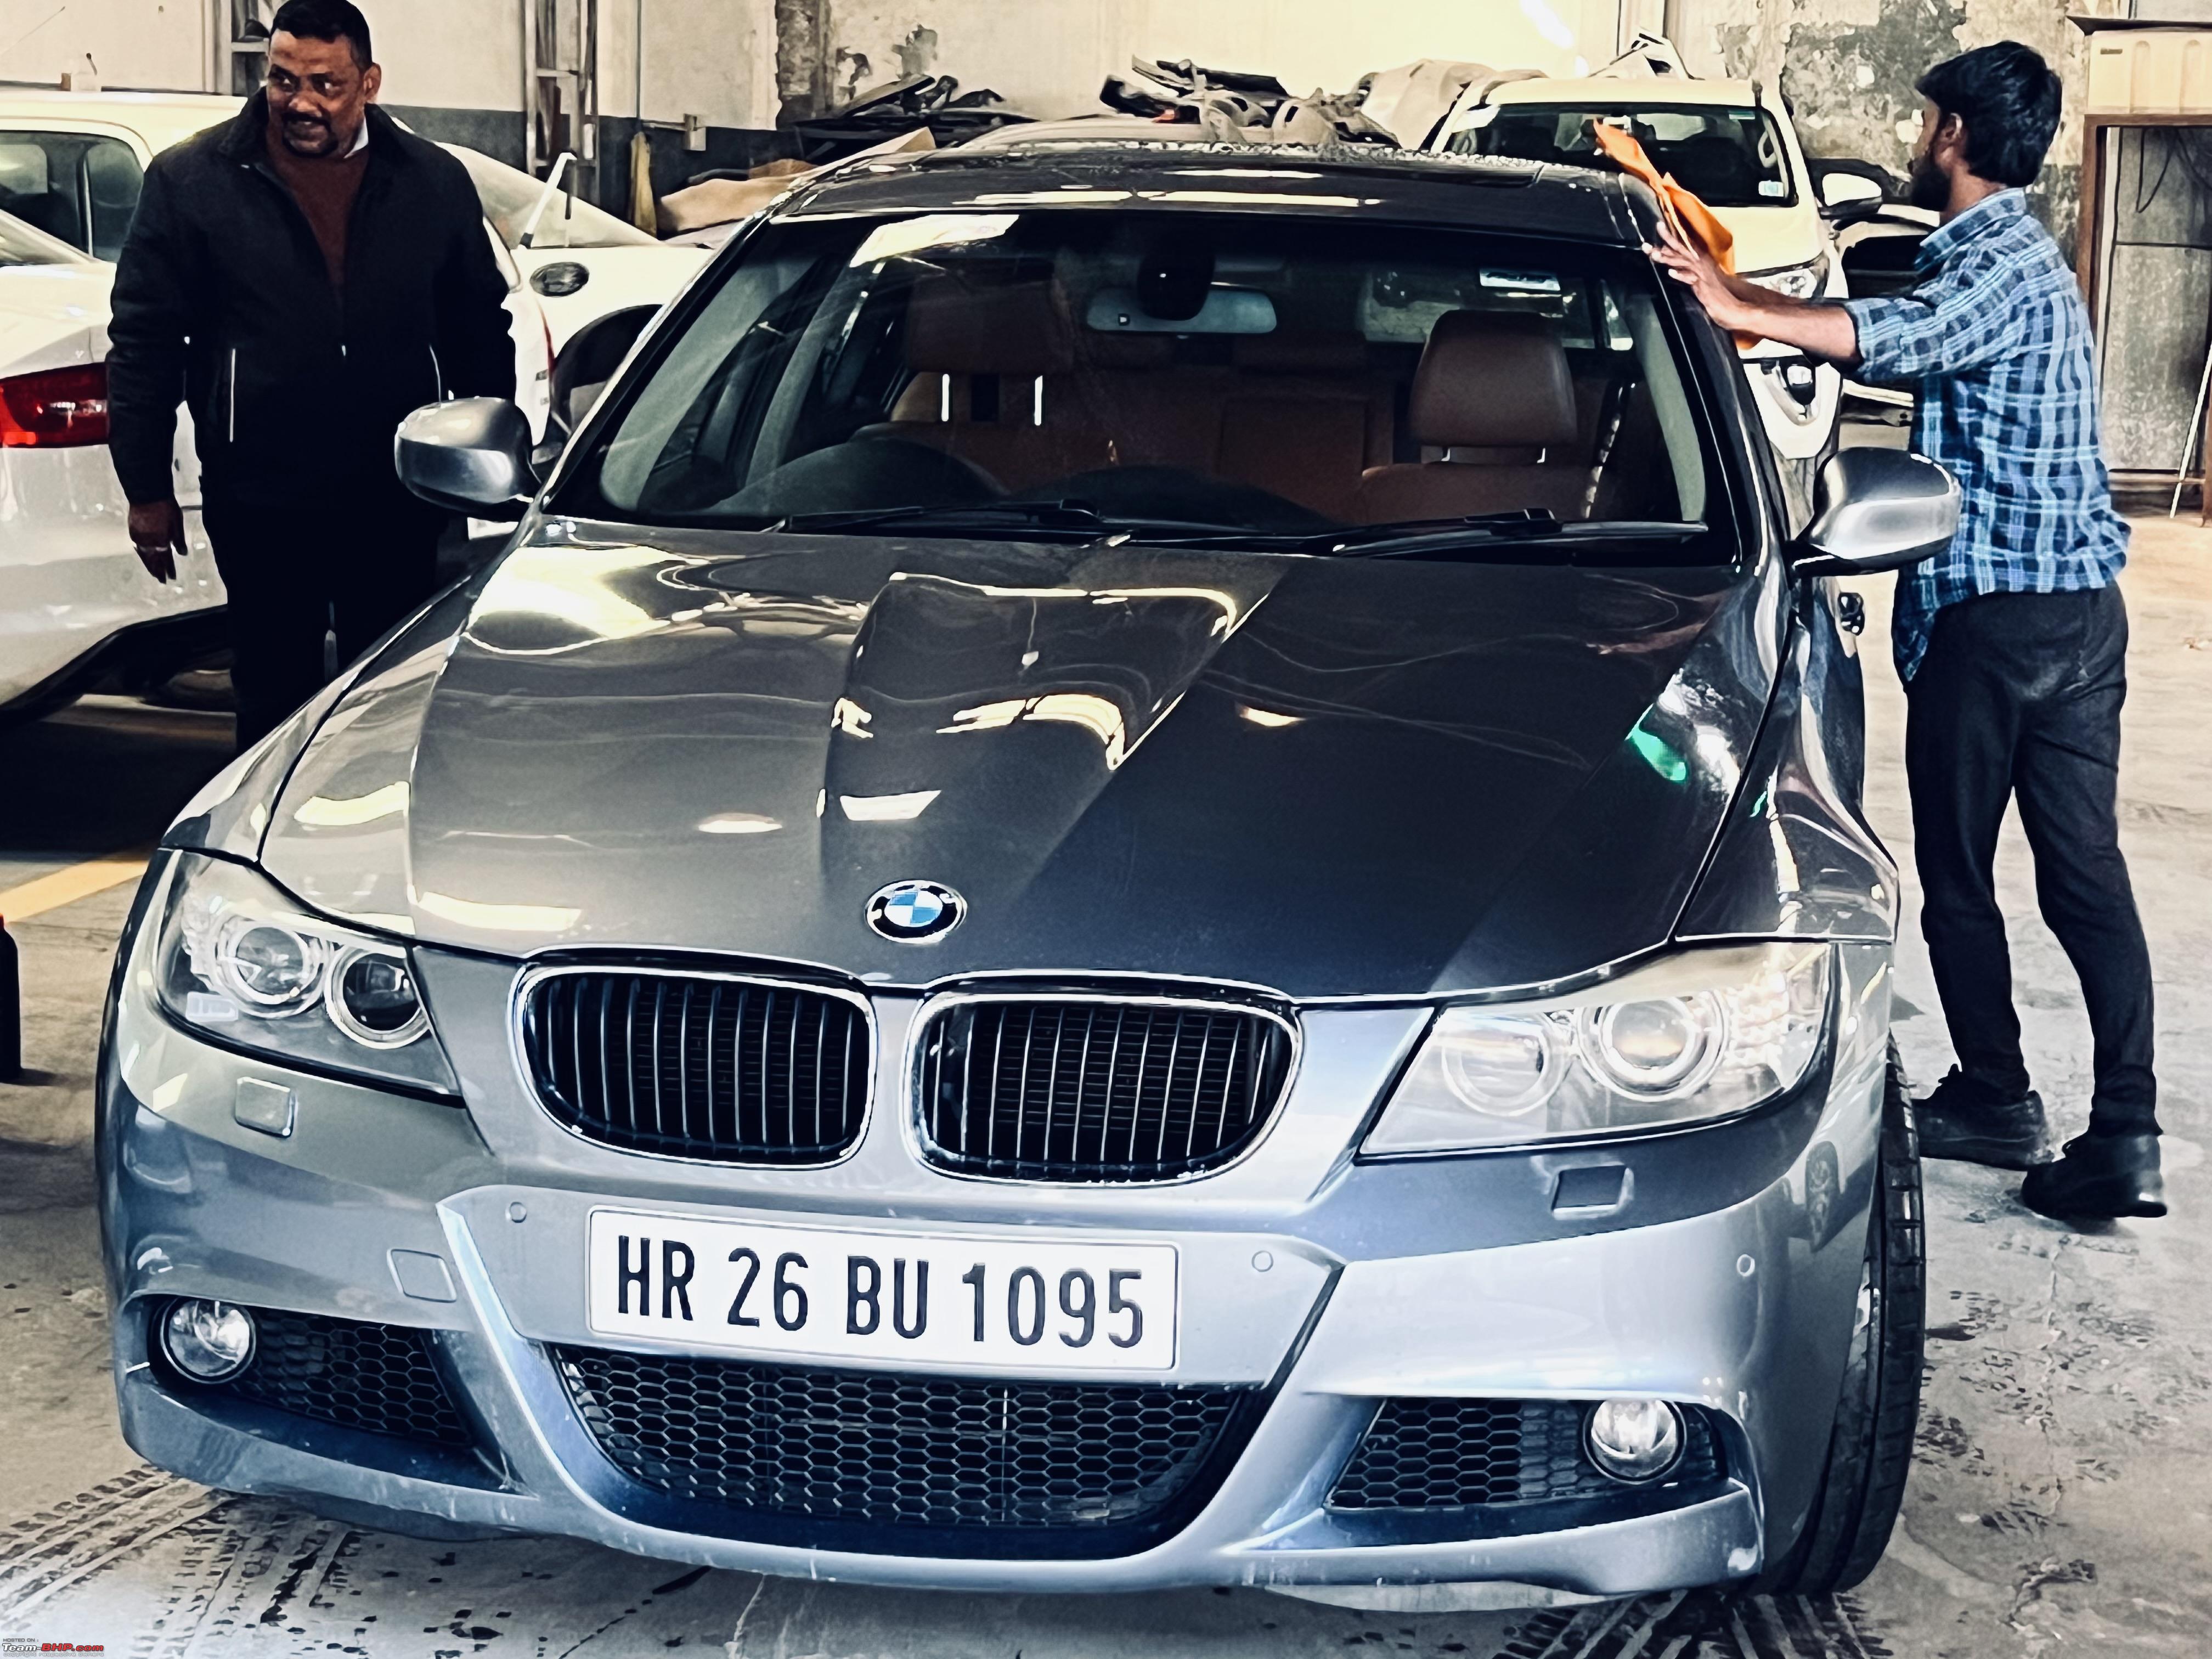 https://www.team-bhp.com/forum/attachments/test-drives-initial-ownership-reports/2444060d1682484606-pre-owned-bmw-330i-e90-i-travelled-2200-km-just-get-my-dream-car-img_2902.jpeg